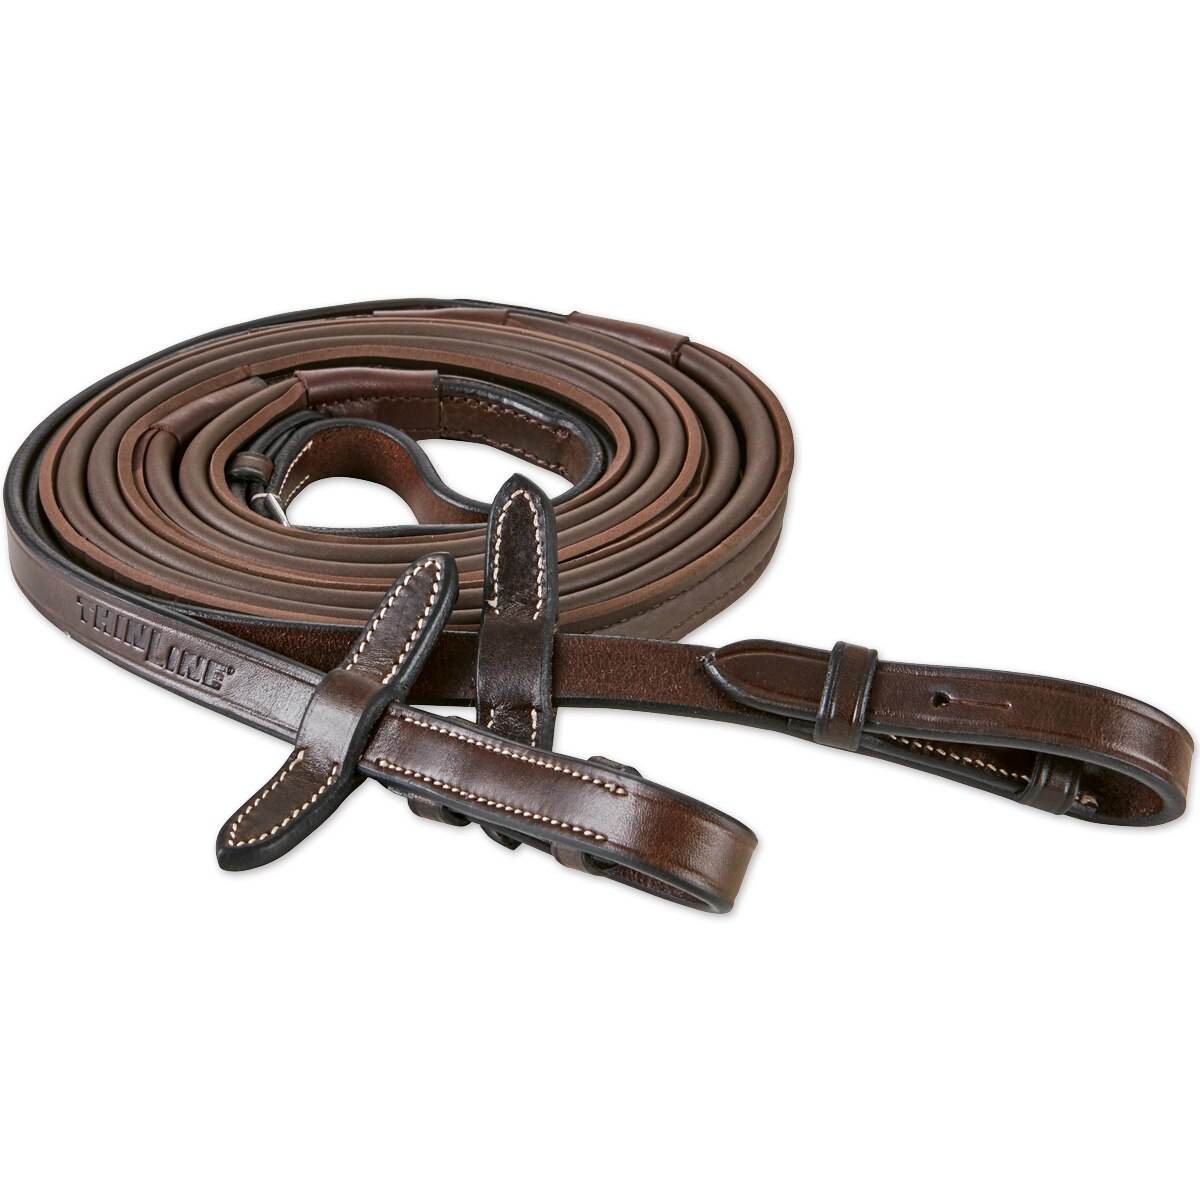 AMAZING QUALITY WITH LOW PRICE GUARANTEED ZILLES QUALITY LEATHER GRIP REINS 